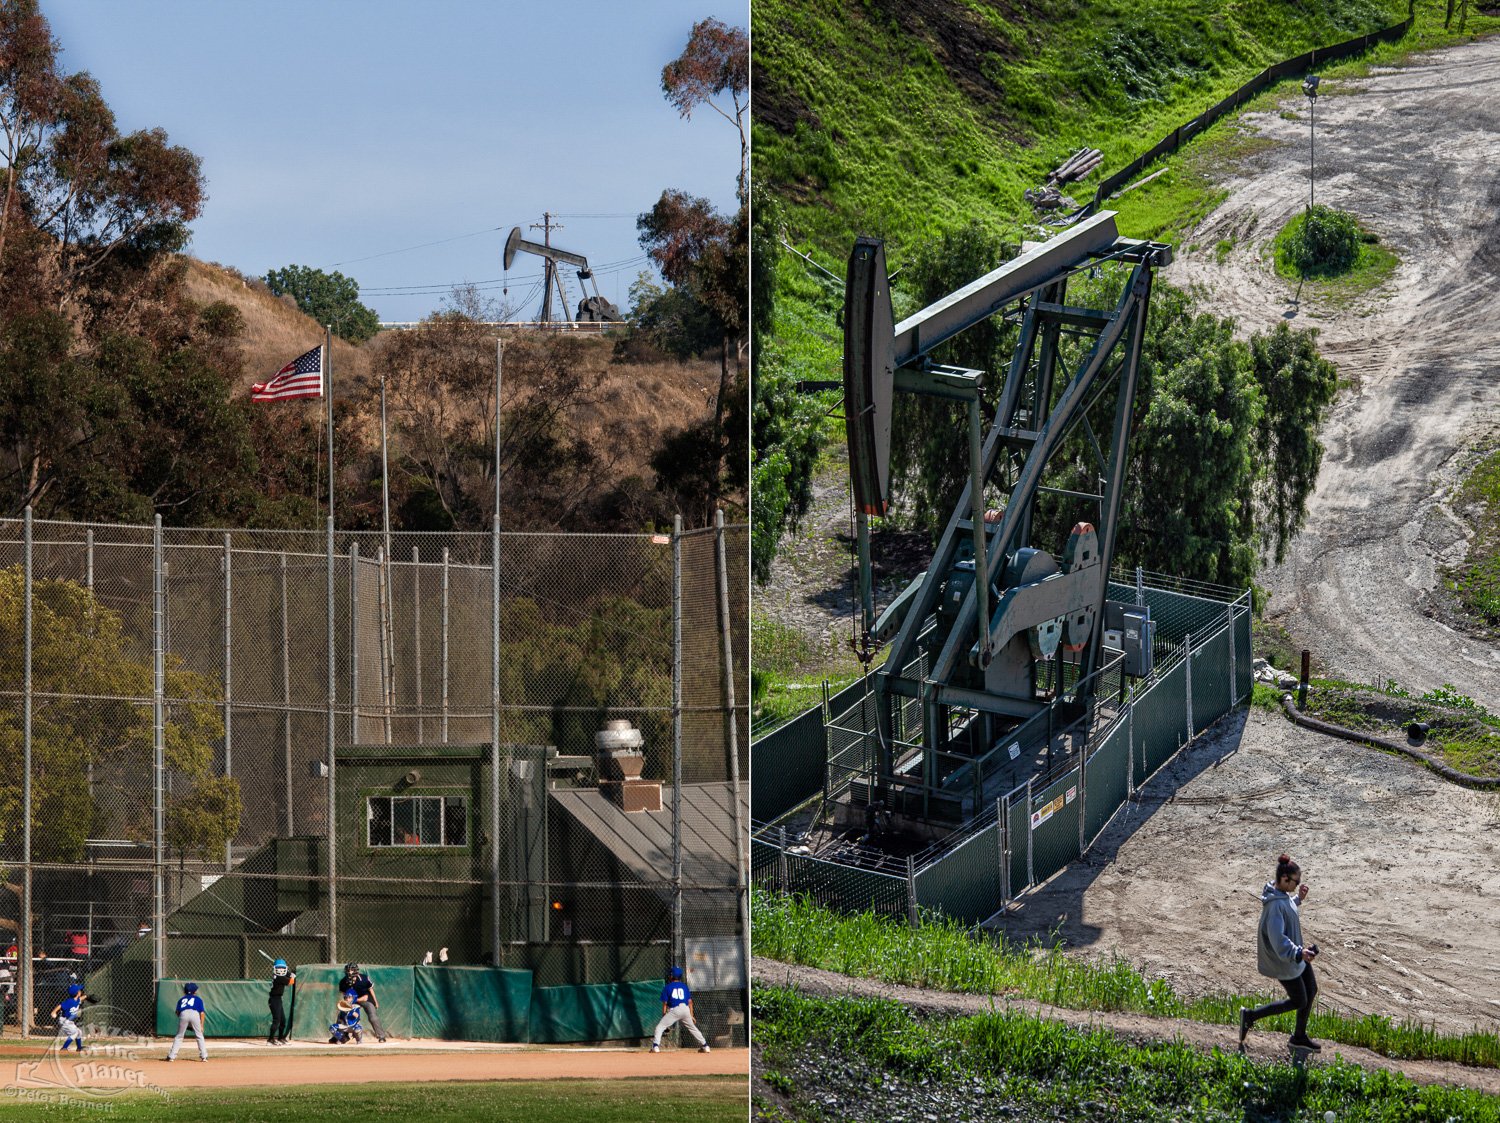  A Little League game is played in the shadow of the Inglewood Oil Field in Culver City.   A young woman jogs past an active pumpjack in the City of Signal Hill. 